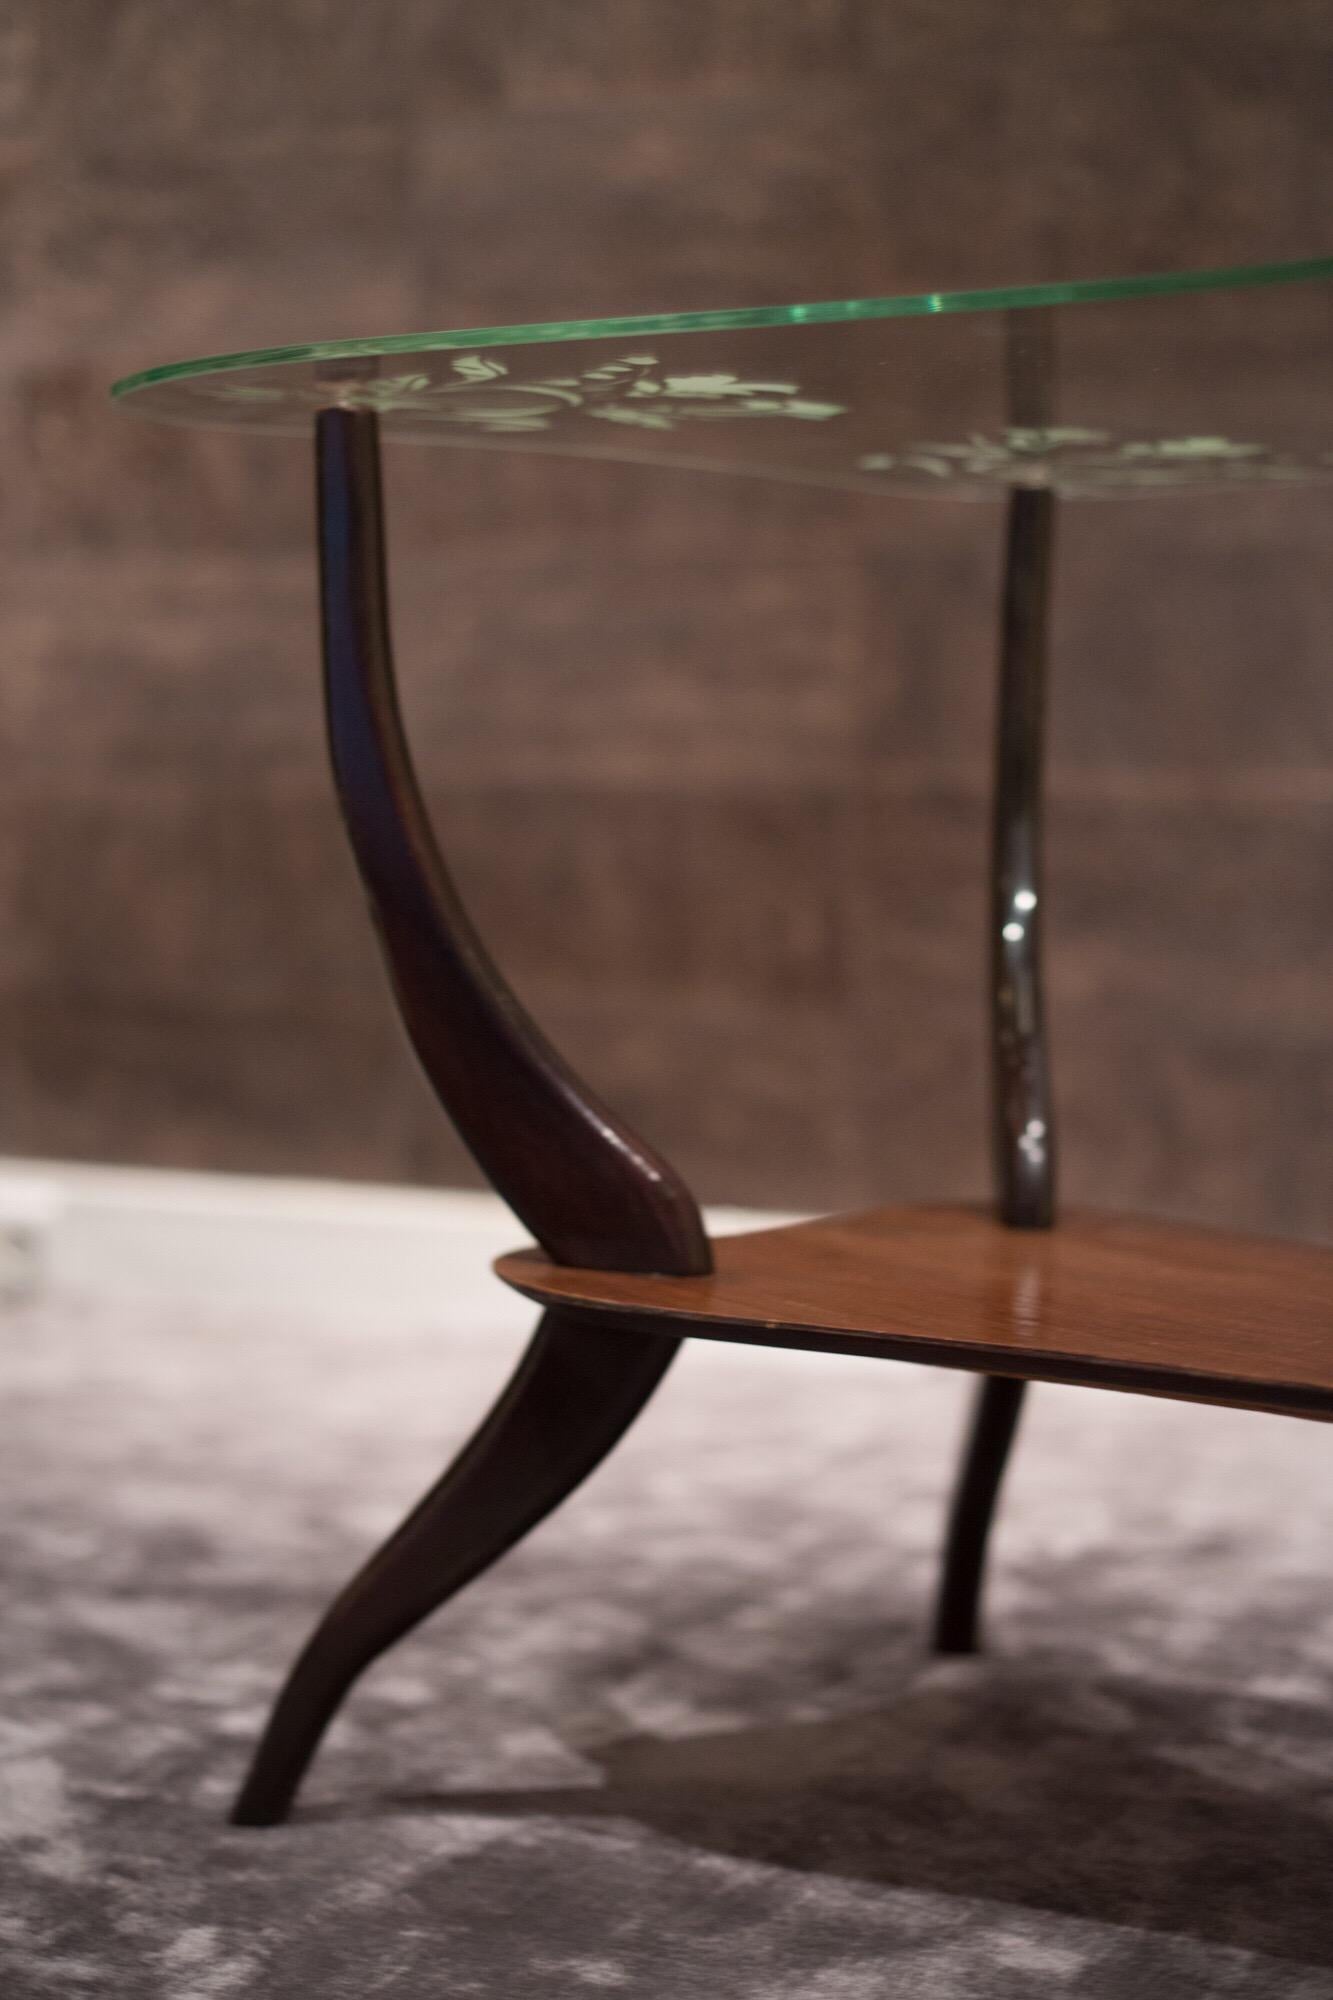 1950s Italian coffee table by Ico Parisi.
This table's top irregular shape was specifically conceived to be able to draw it as close as possible to a sofa or armchair. The tabletop glass is enhanced with a lovely decorative floral pattern.
Supported